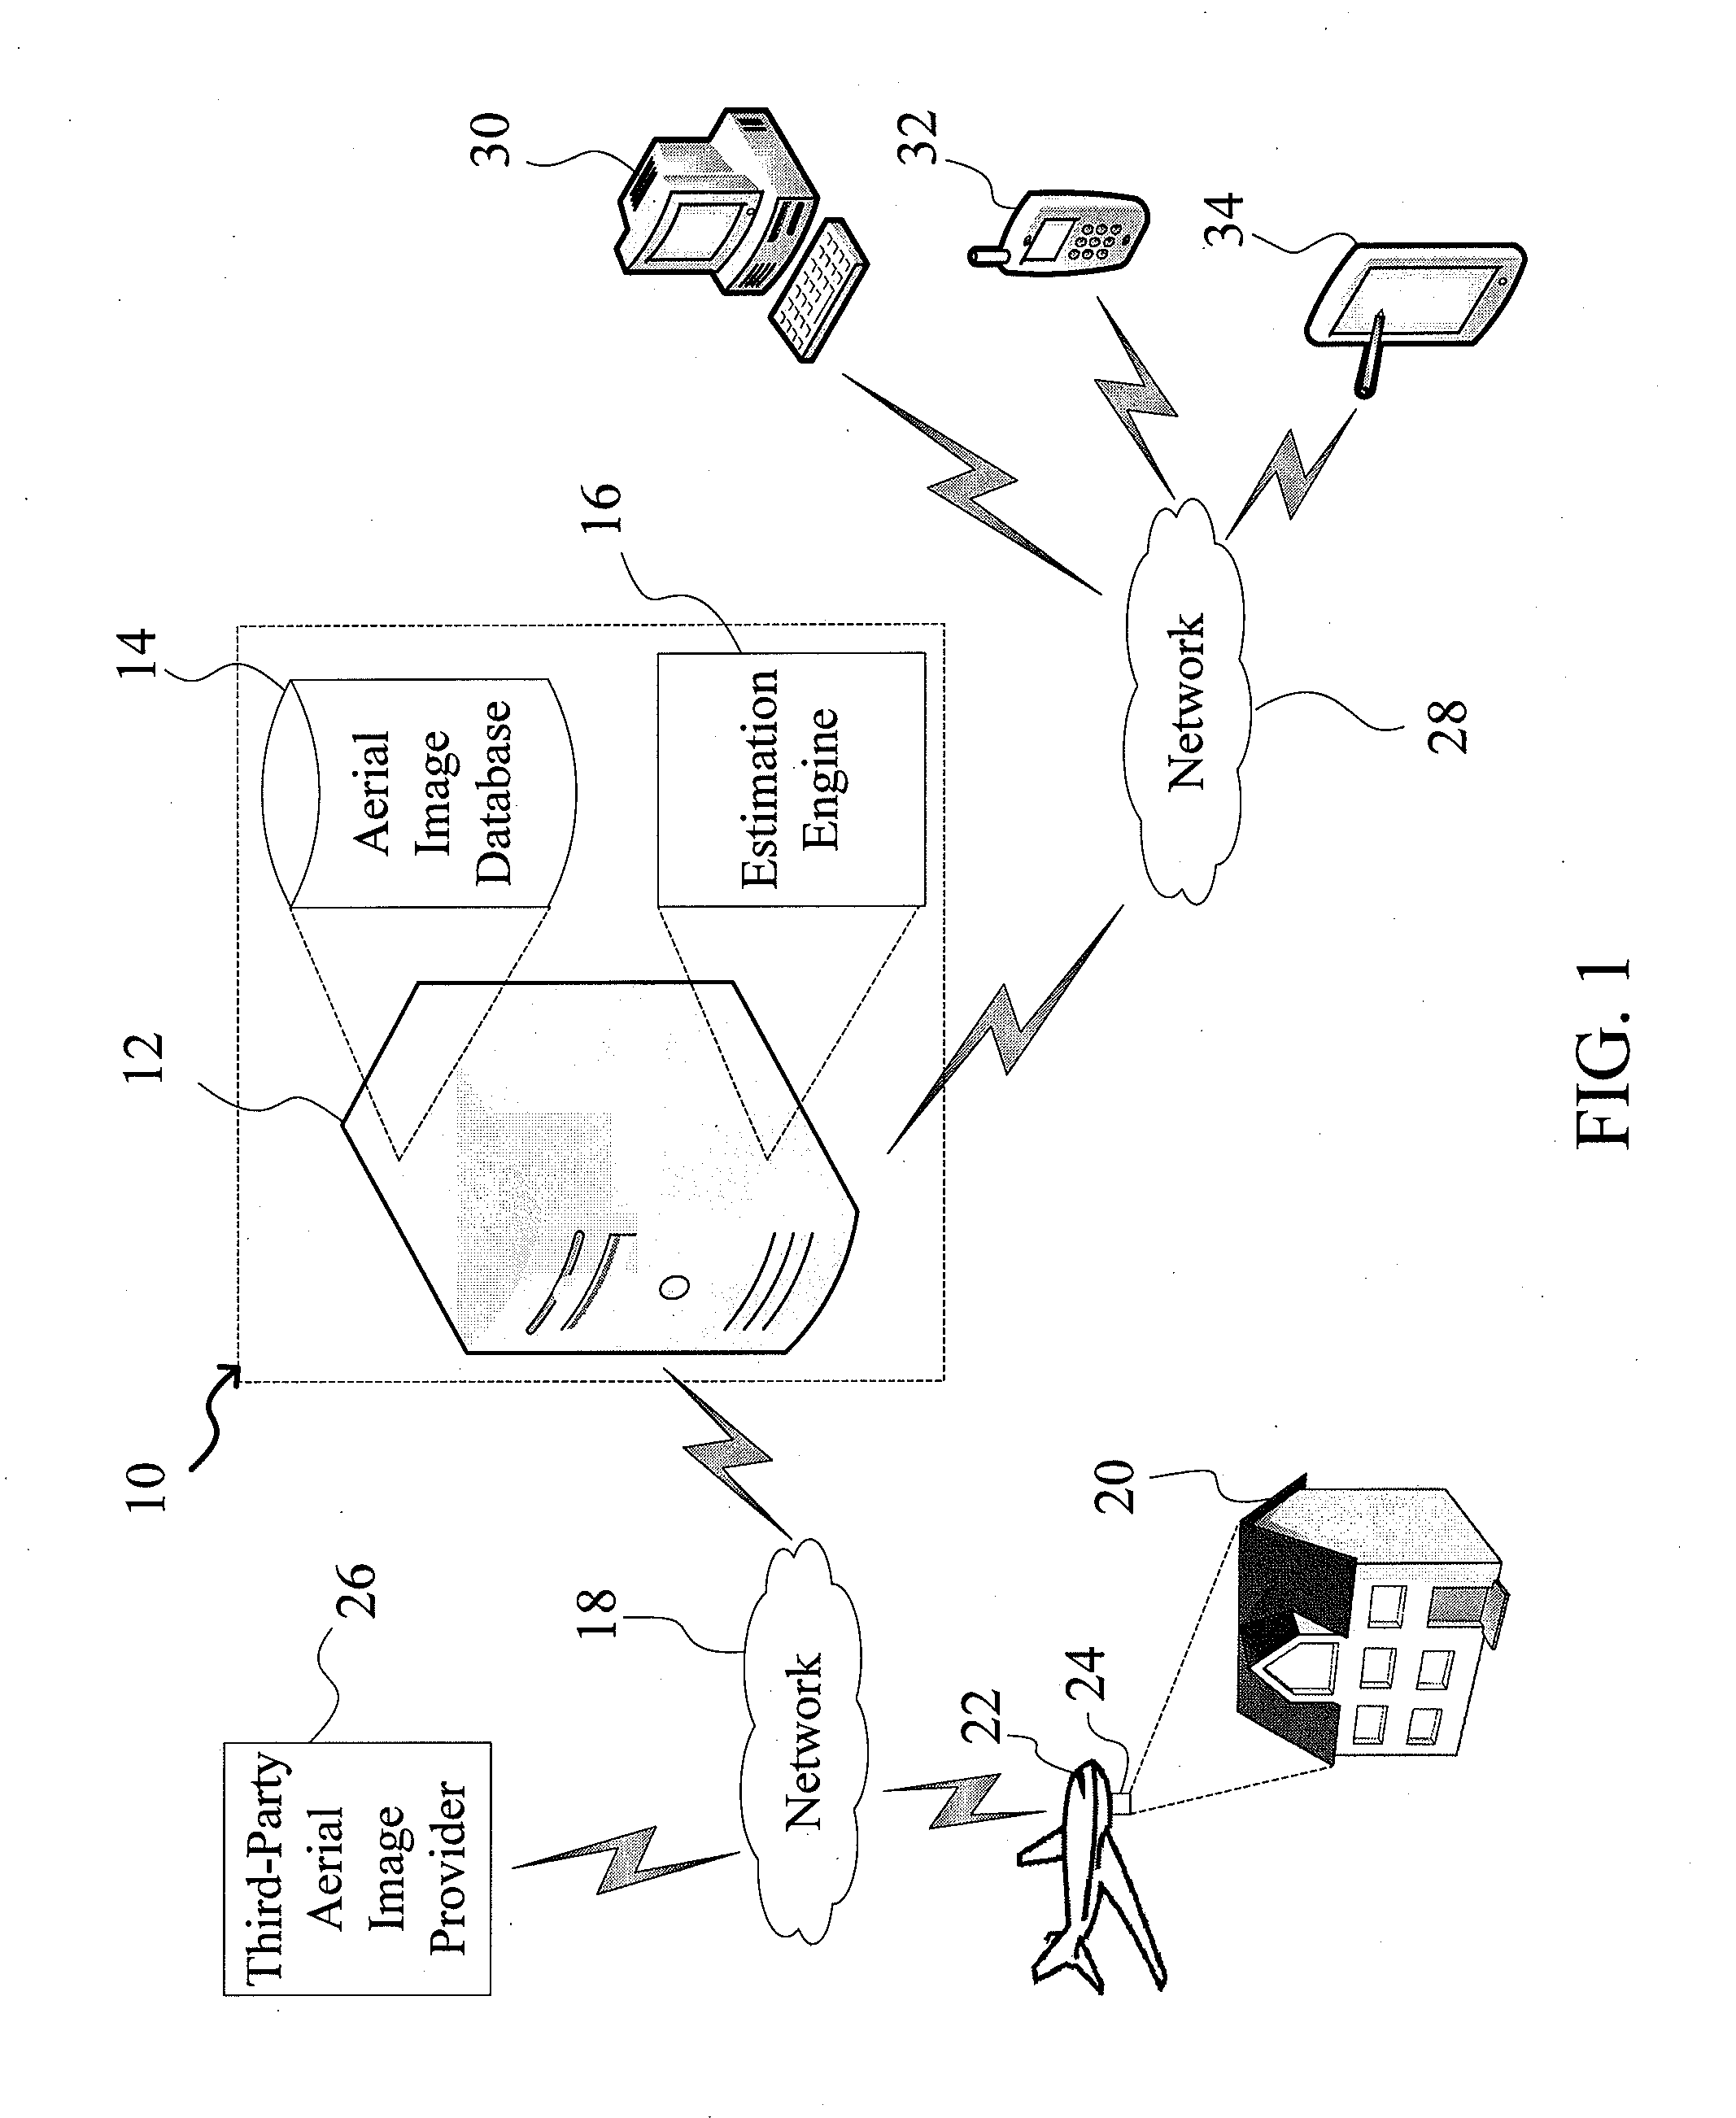 System and Method for Construction Estimation Using Aerial Images